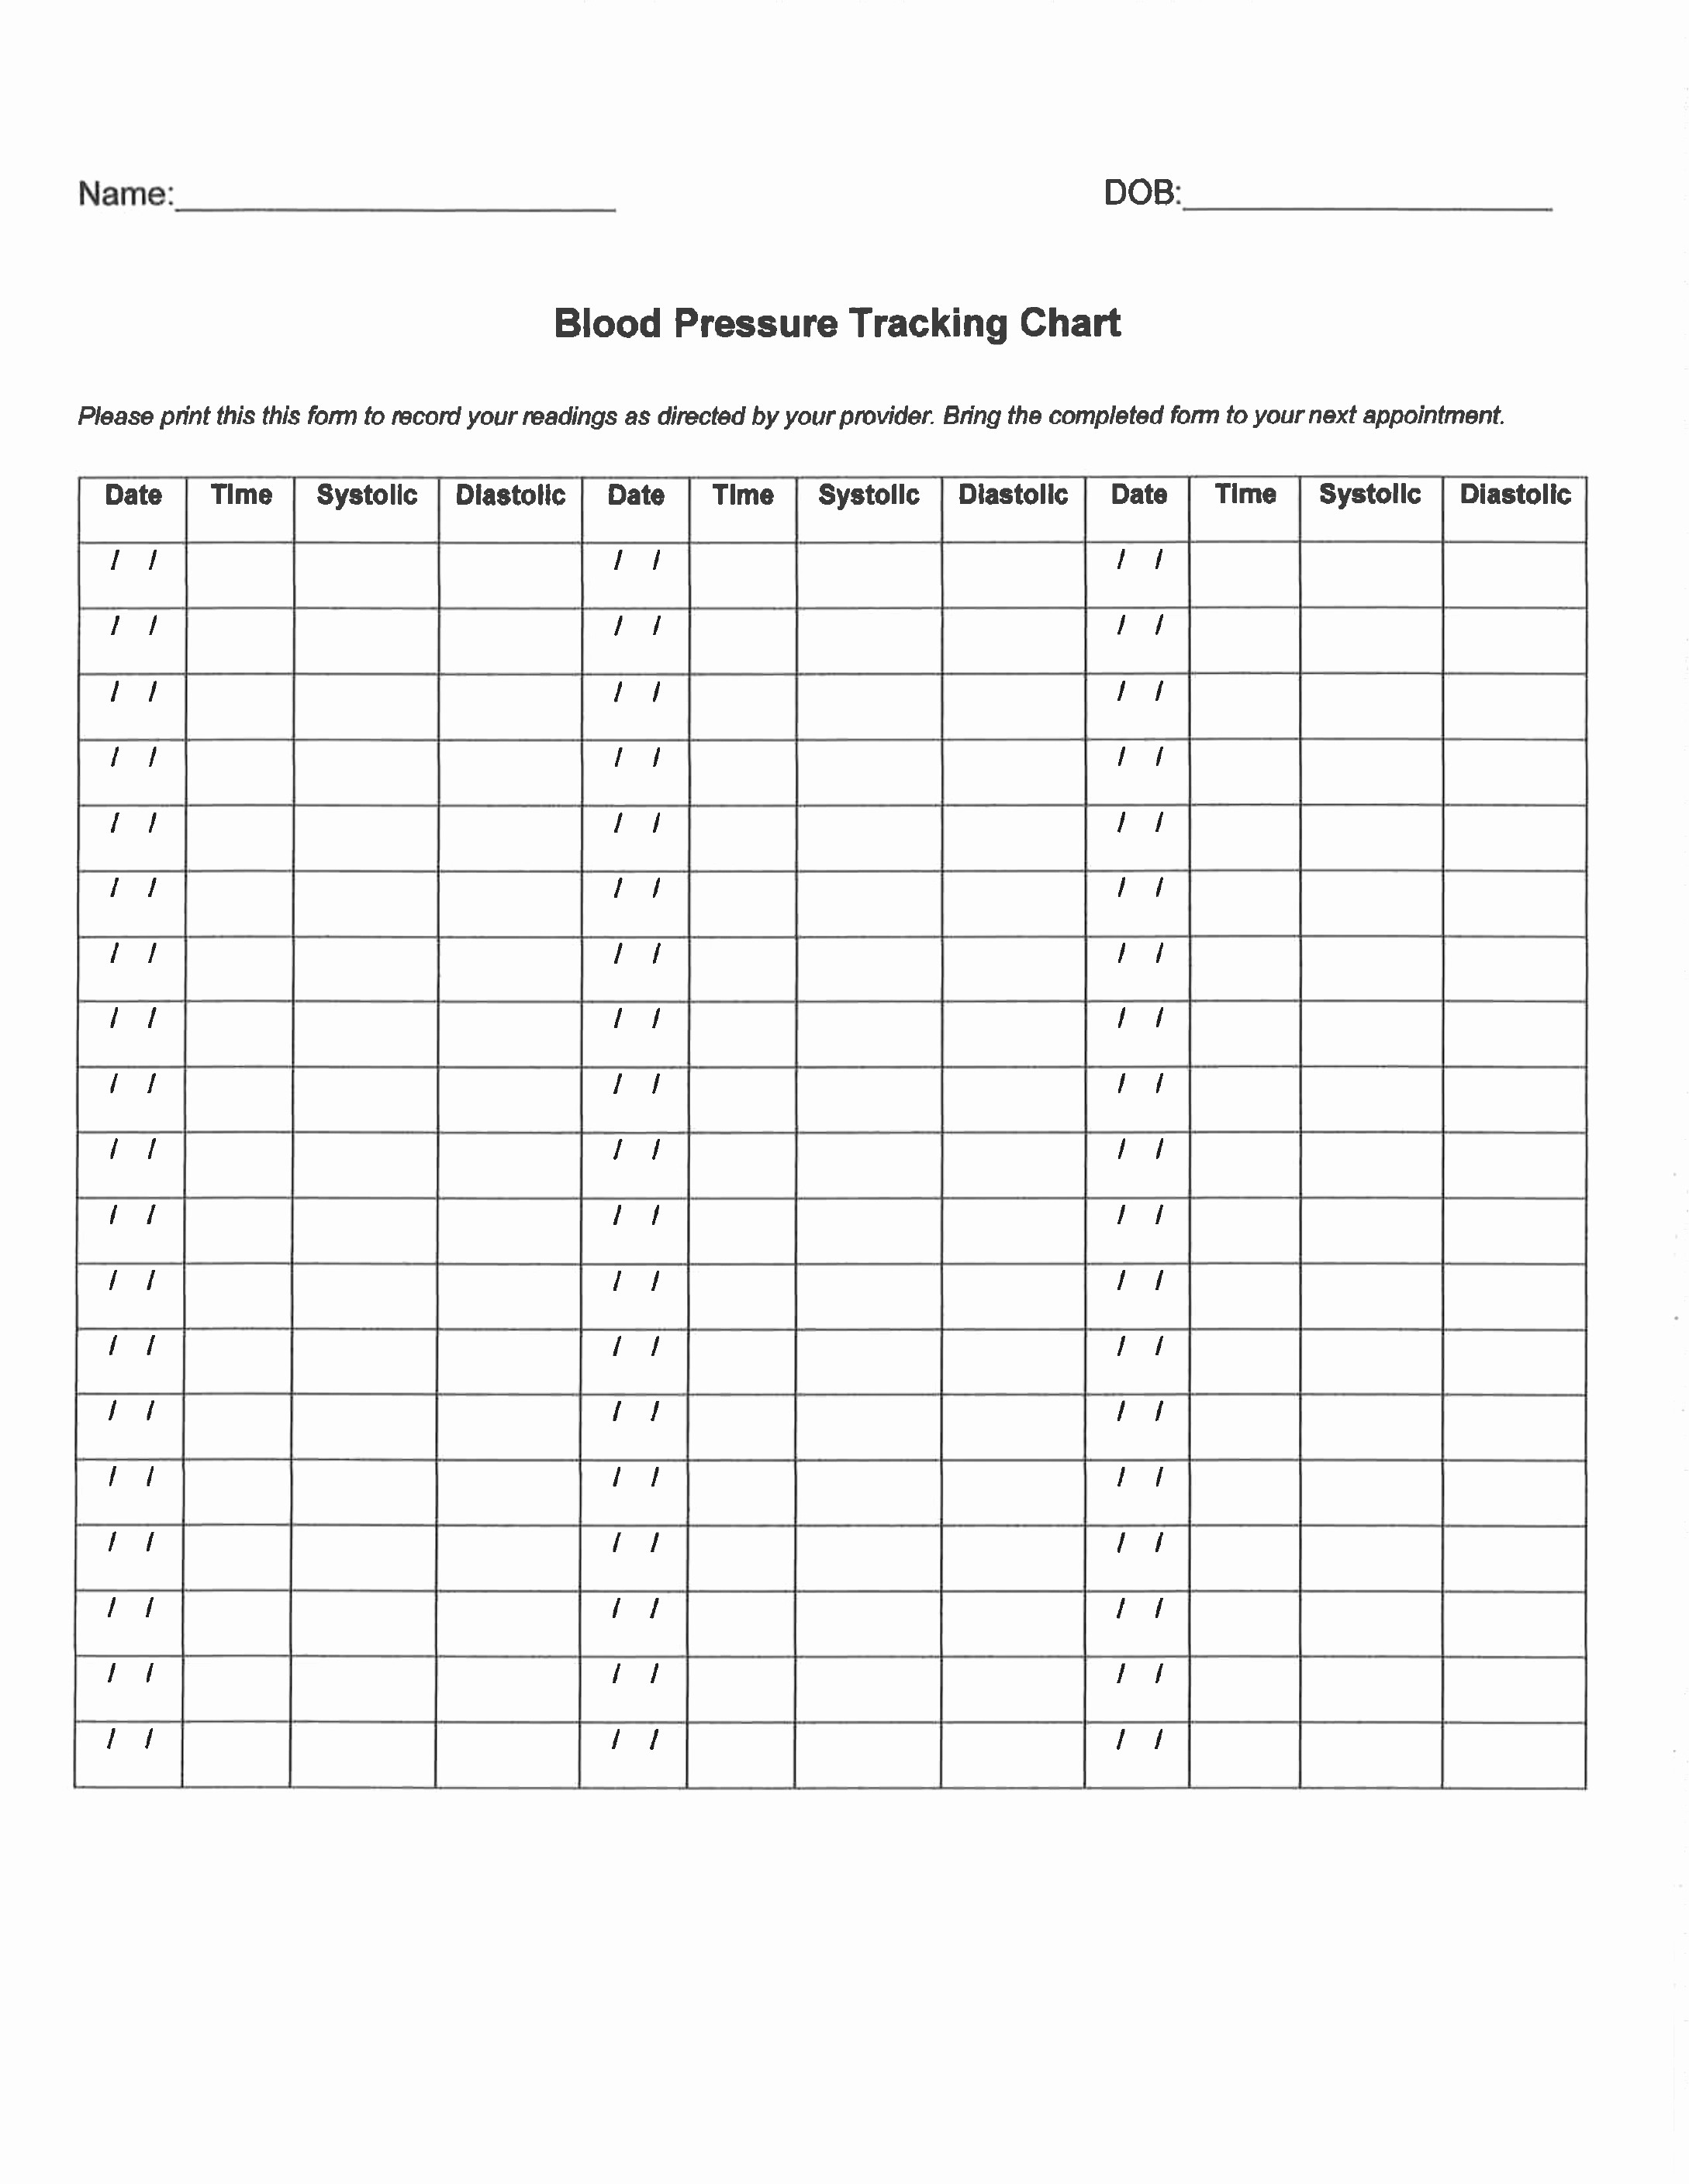 Blood Pressure Recording Chart Excel Best Of Tracking Document